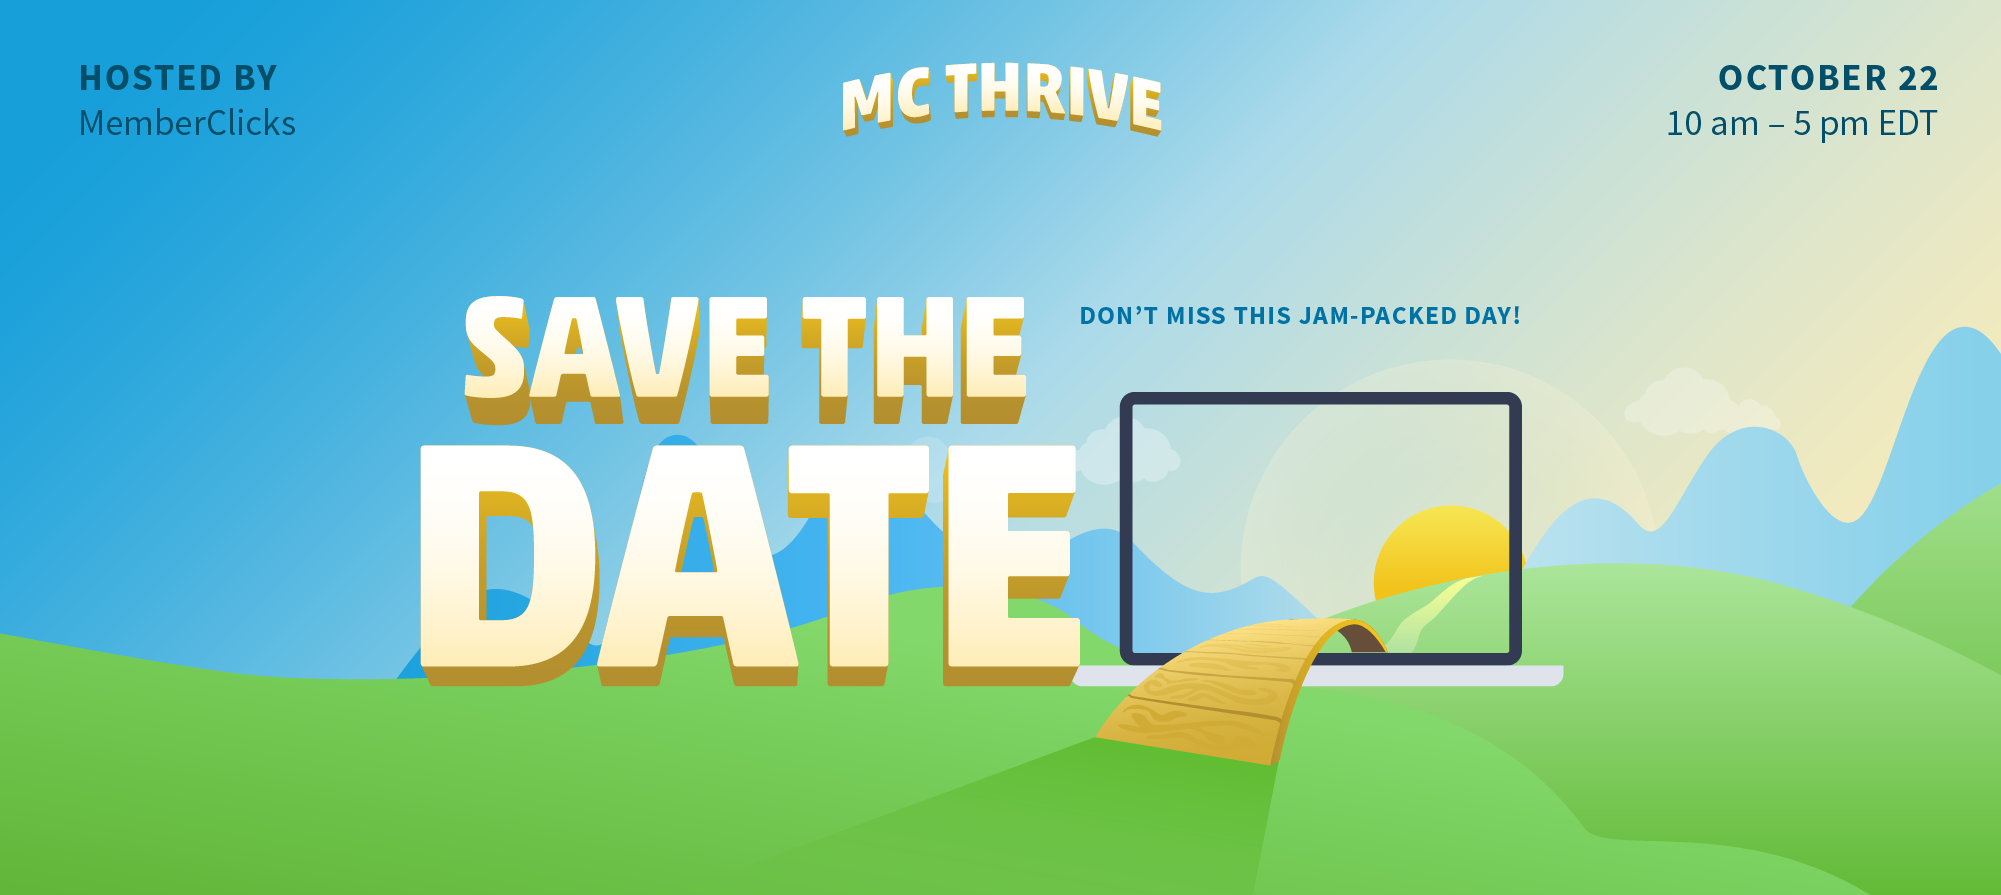 MC Thrive Fall 2020 Email Graphics-save the date